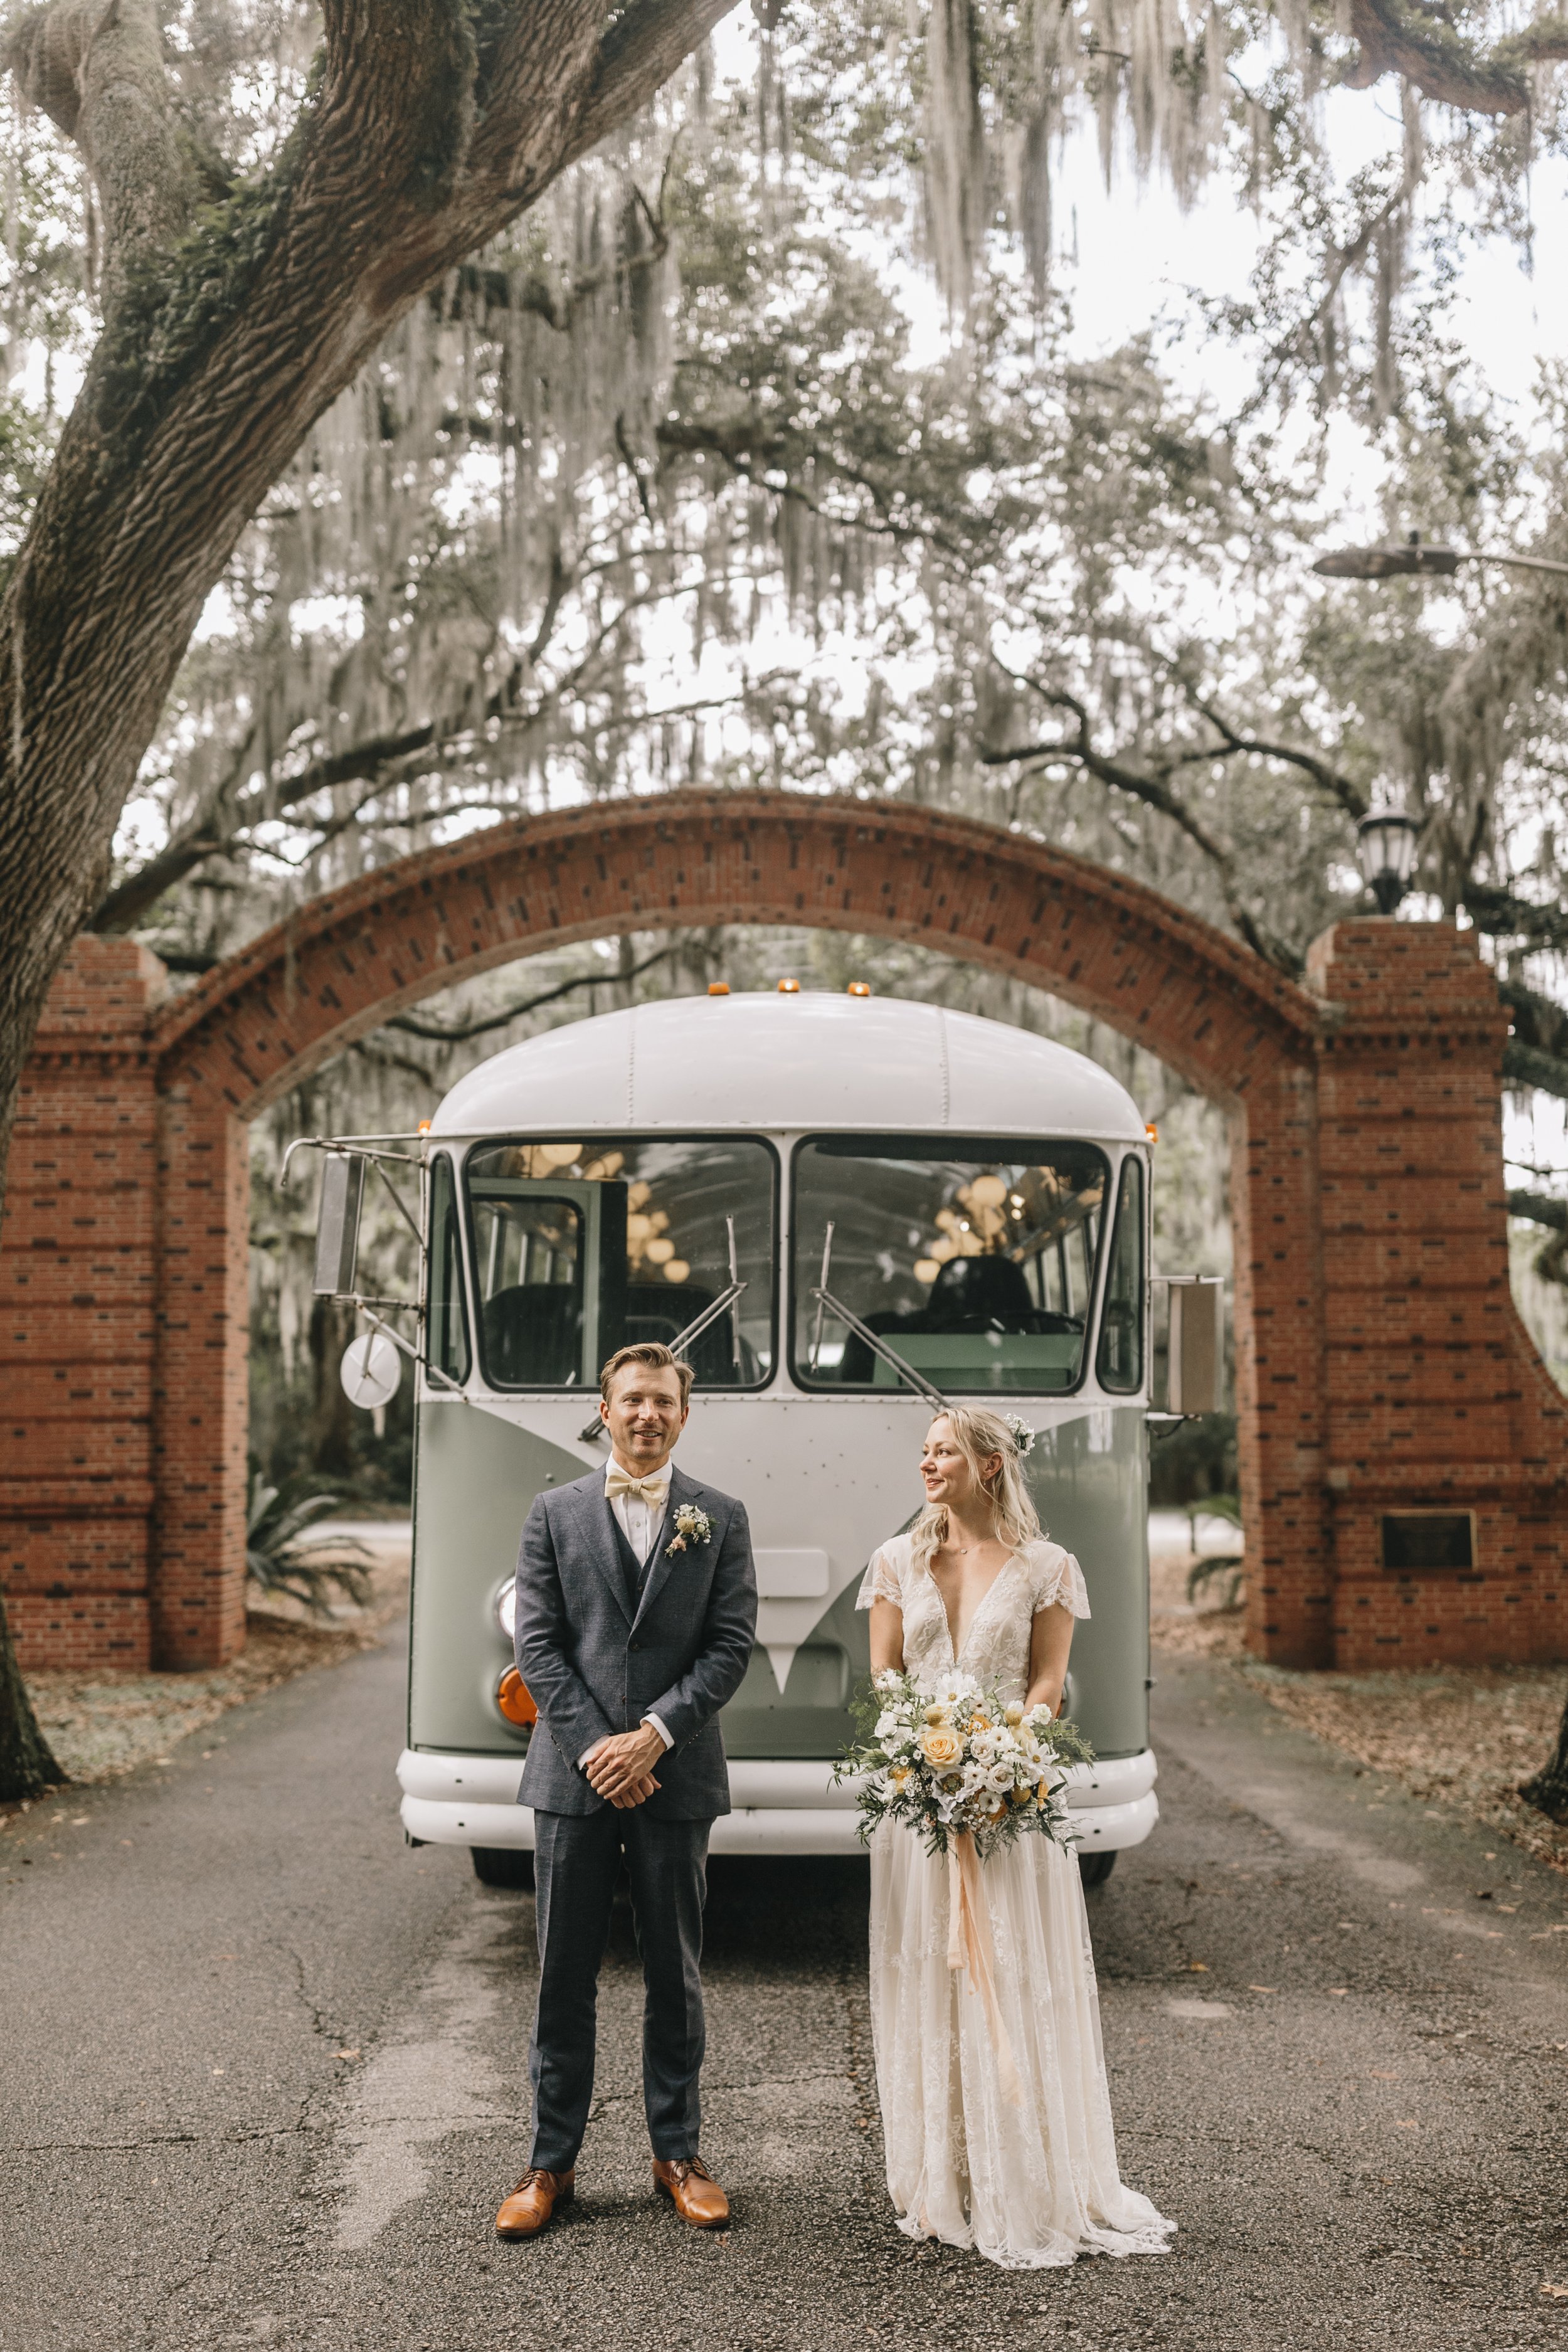 ivory-and-beau-wedding-and-florals-southern-wedding-savannah-florist-savannah-wedding-savannah-wedding-planner-the-wyld-dock-bar-historic-savannah-georgia-wedding-flowers-wedding-blog-wedding-inspiration-LAUREN+NICK_WEDDING-291.jpg